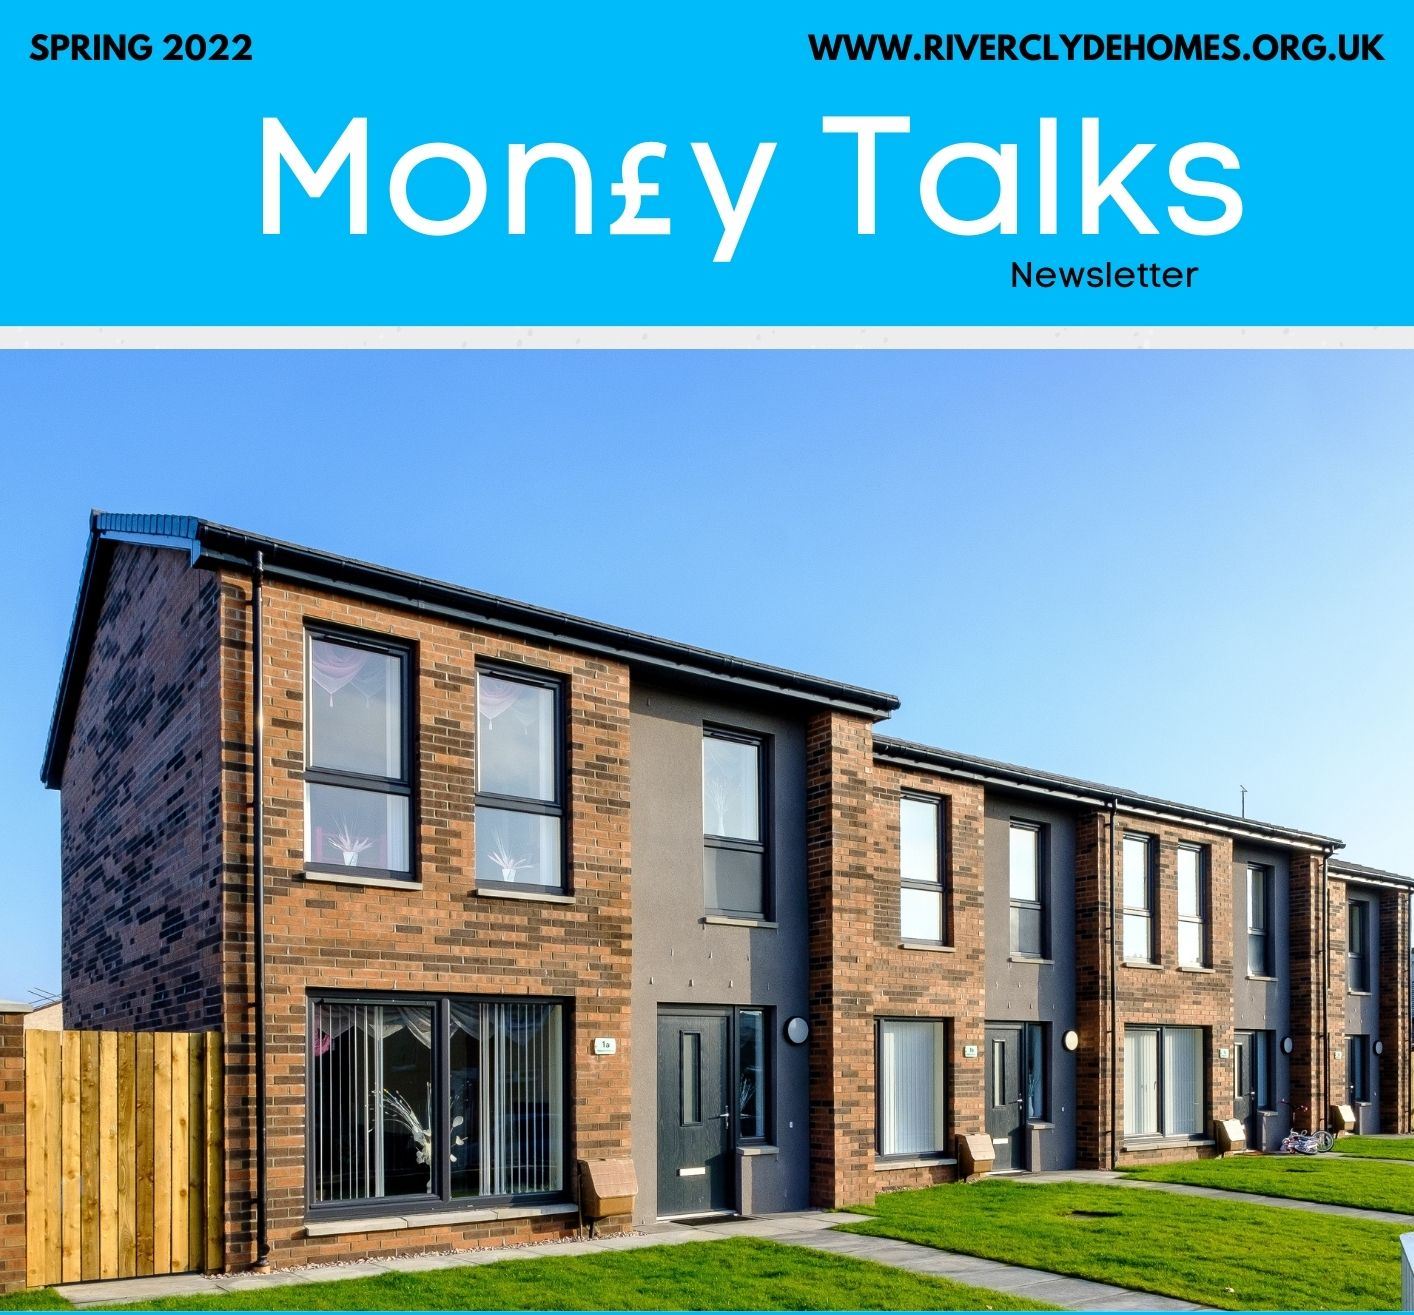 River Clyde Homes launches financial wellbeing newsletter